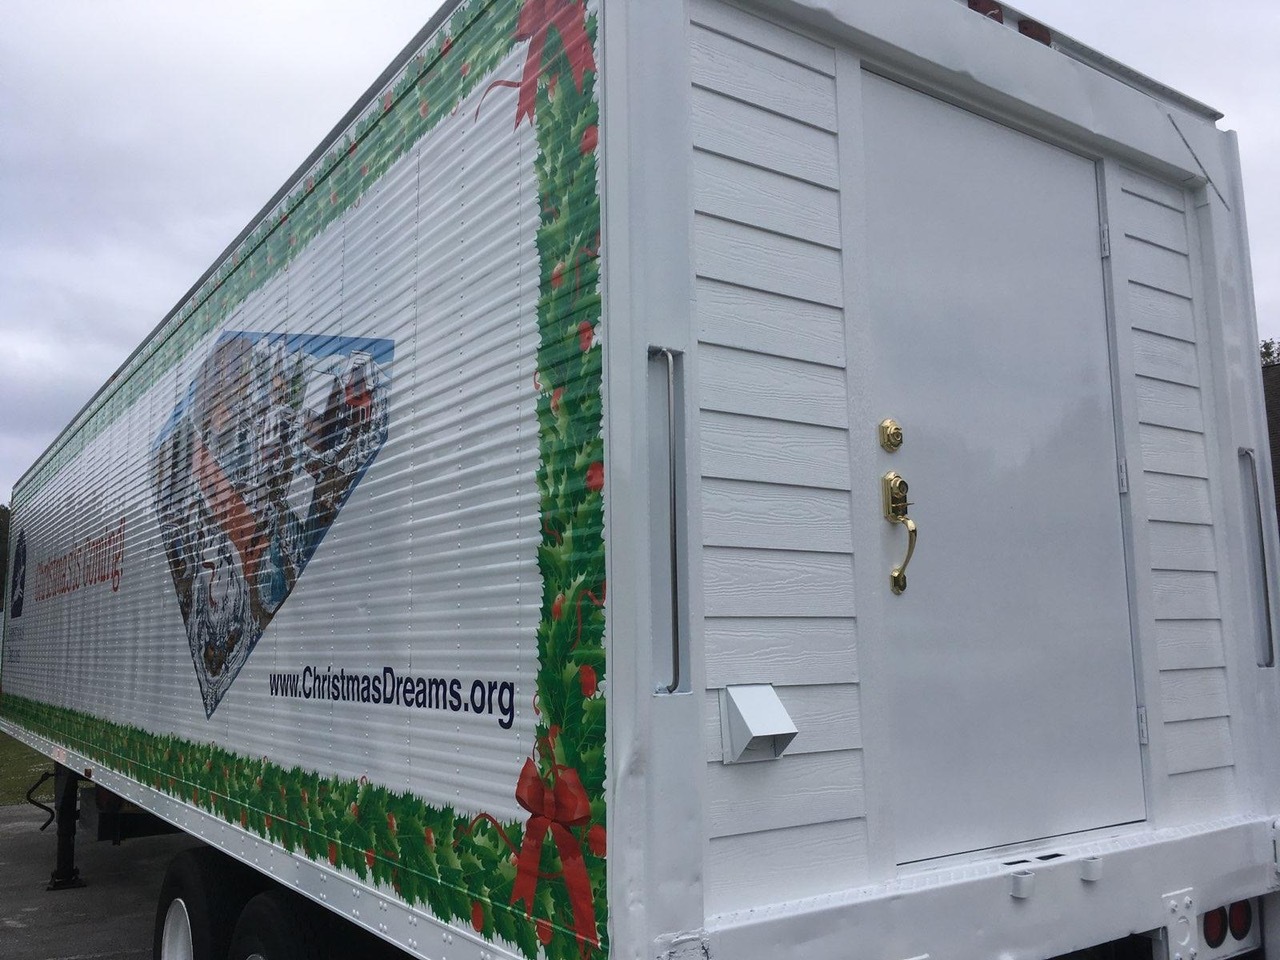 The “Christmas Is Coming” experience is housed in a 40-foot trailer.